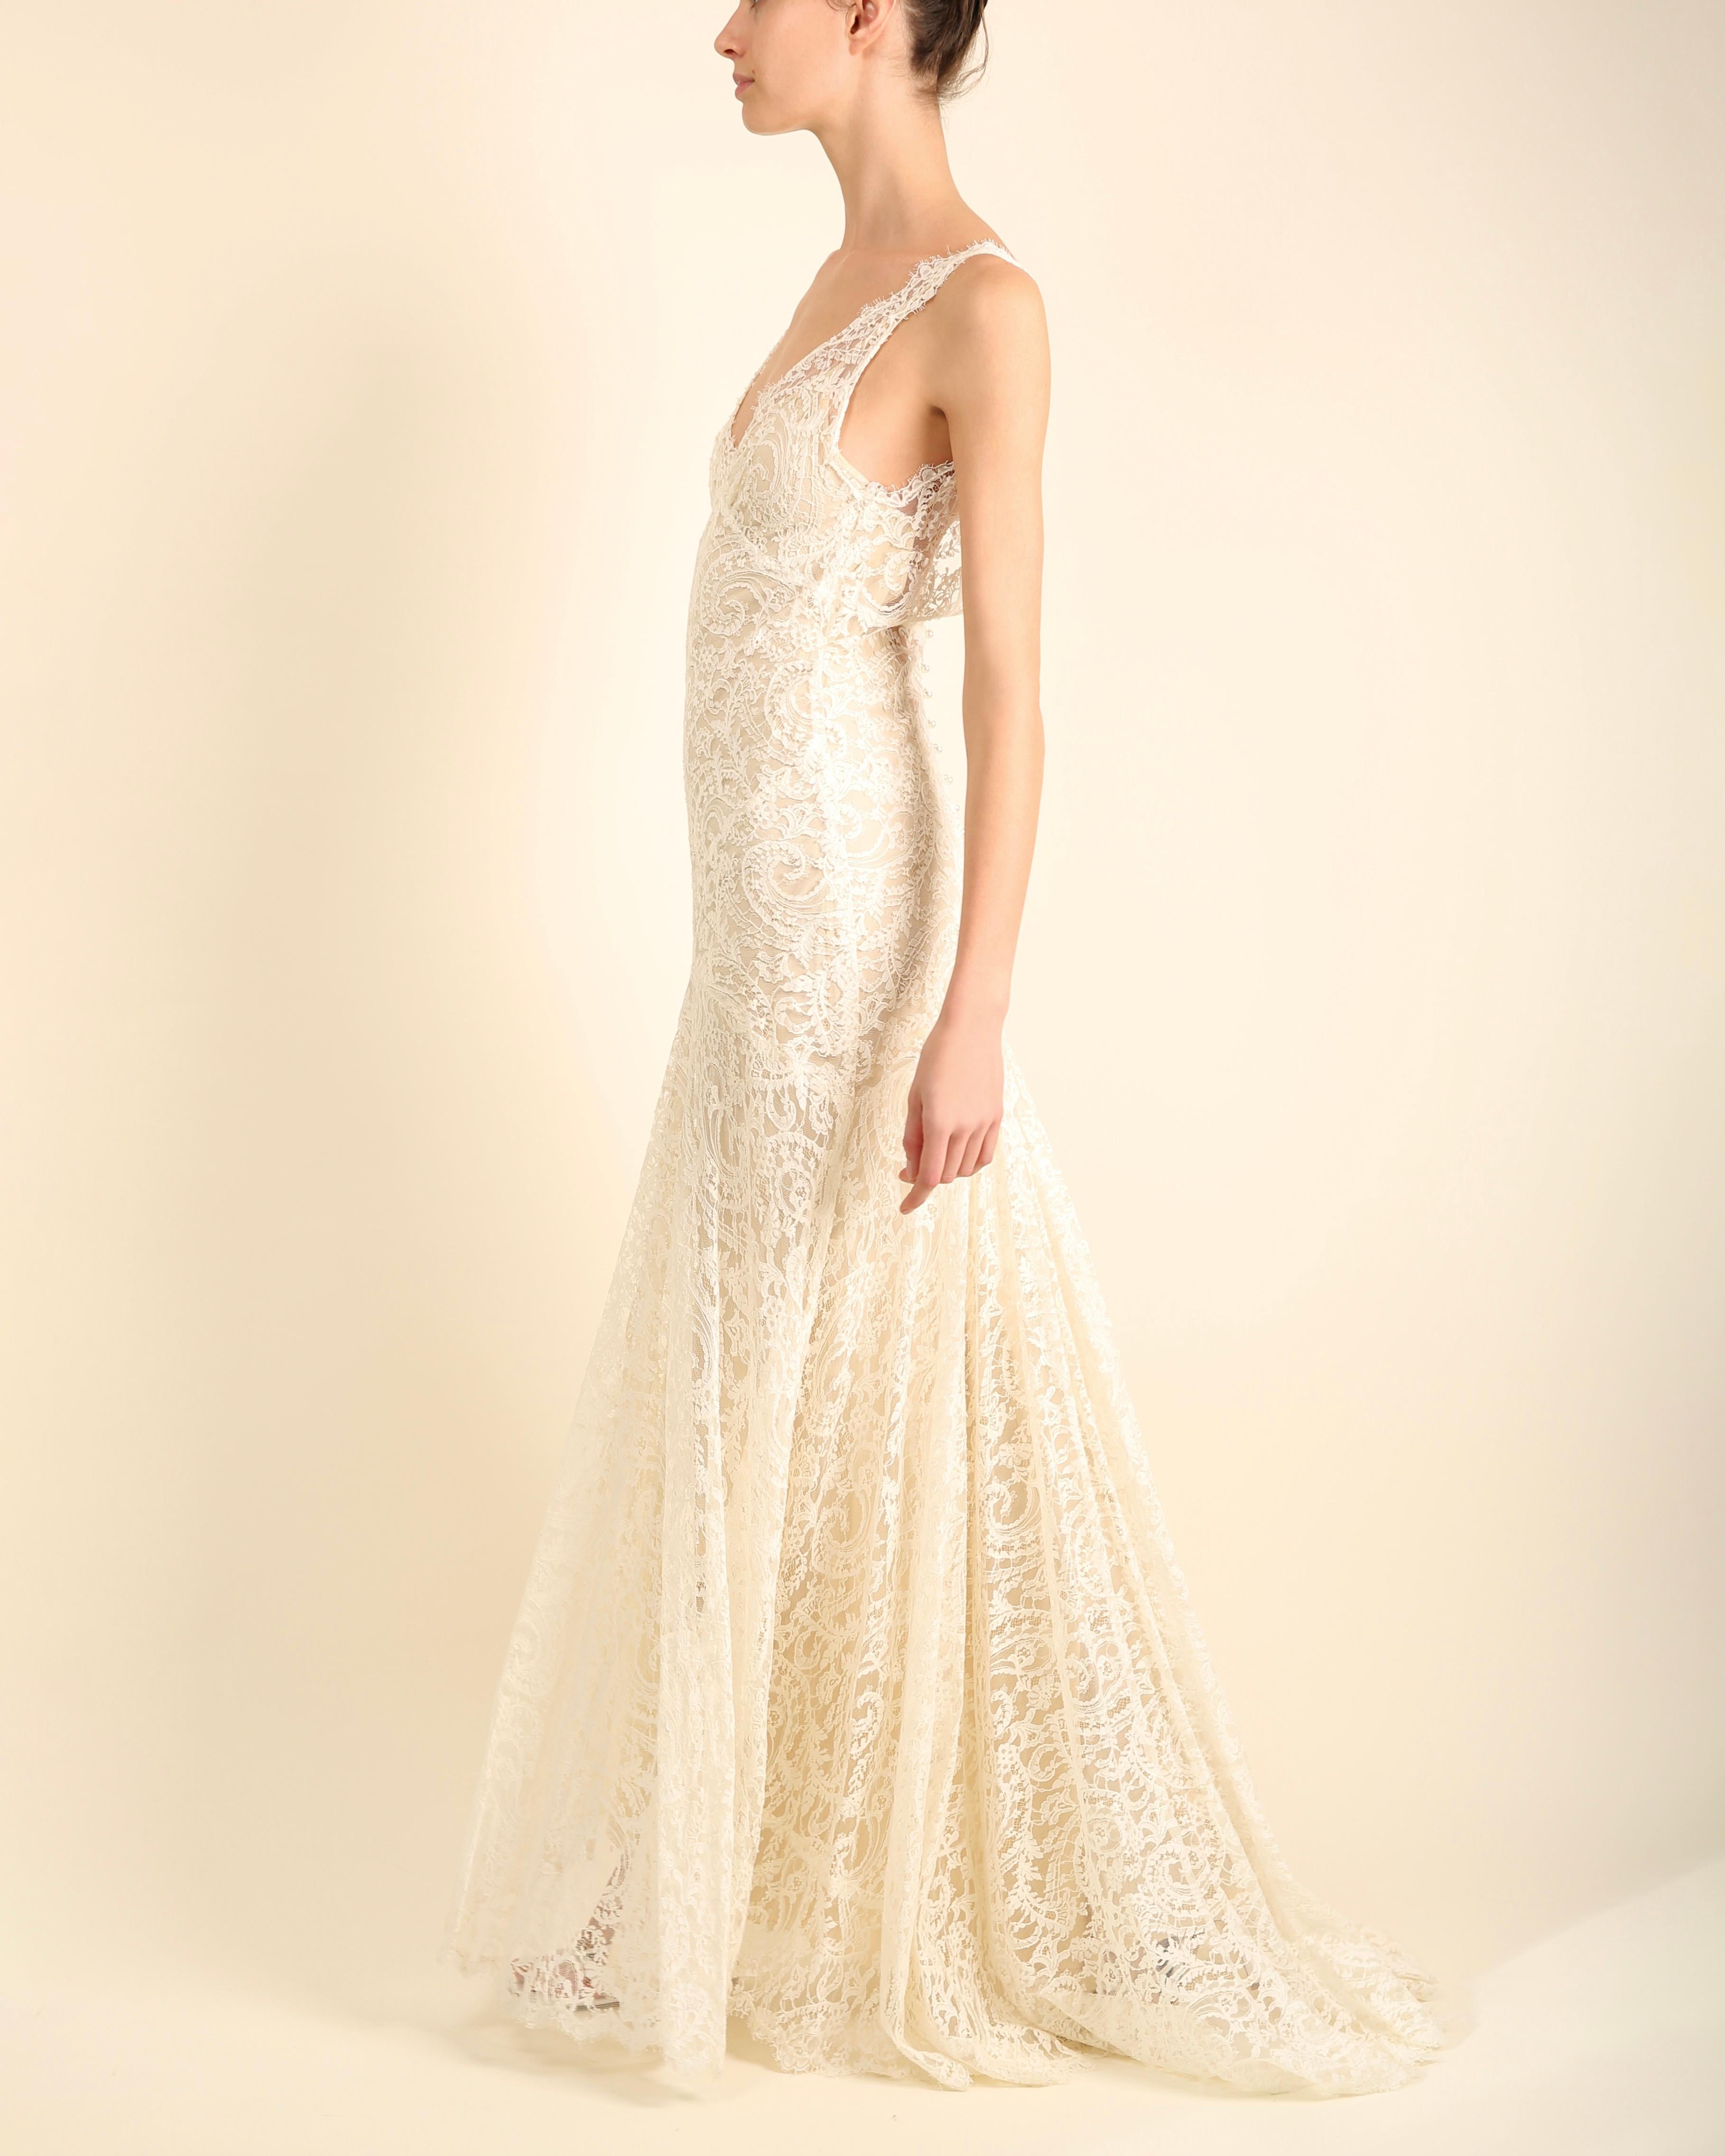 Monique Lhuillier ivory lace plunging backless wedding gown with train dress  9